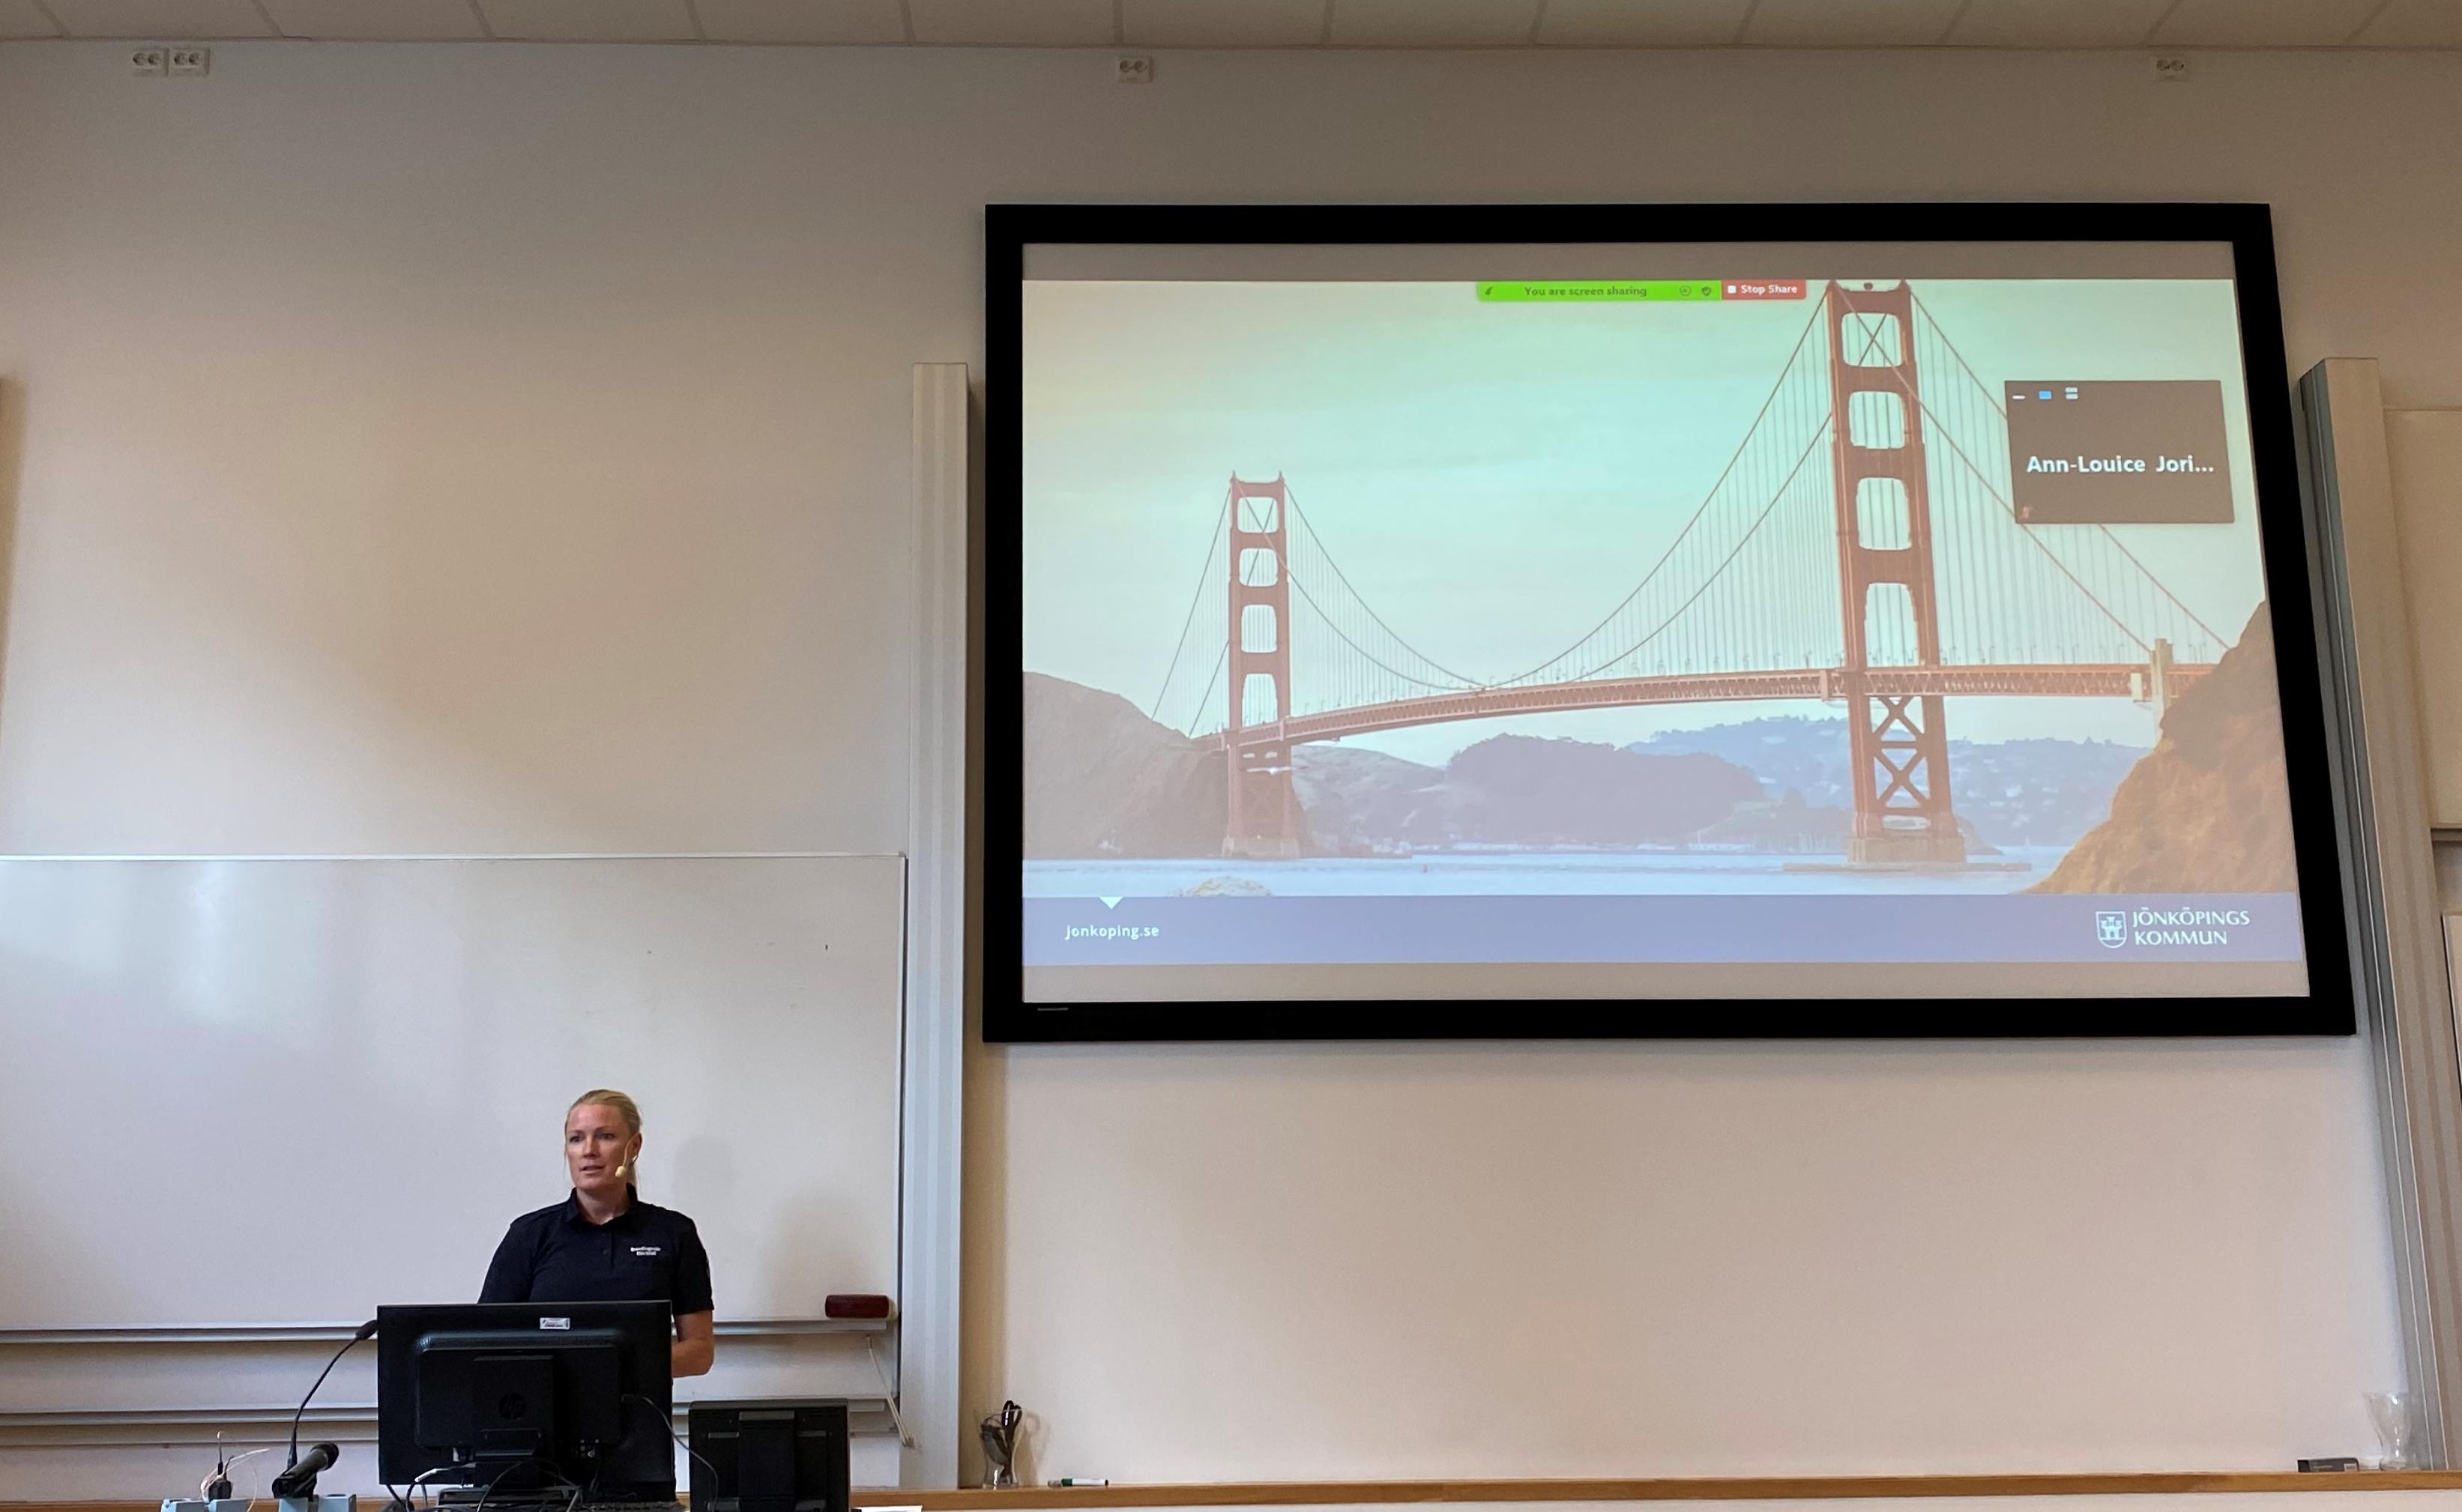 Elin Isfall, presenting and showing an image of the Golden Gate bridge in San Fransisco on the screen. 